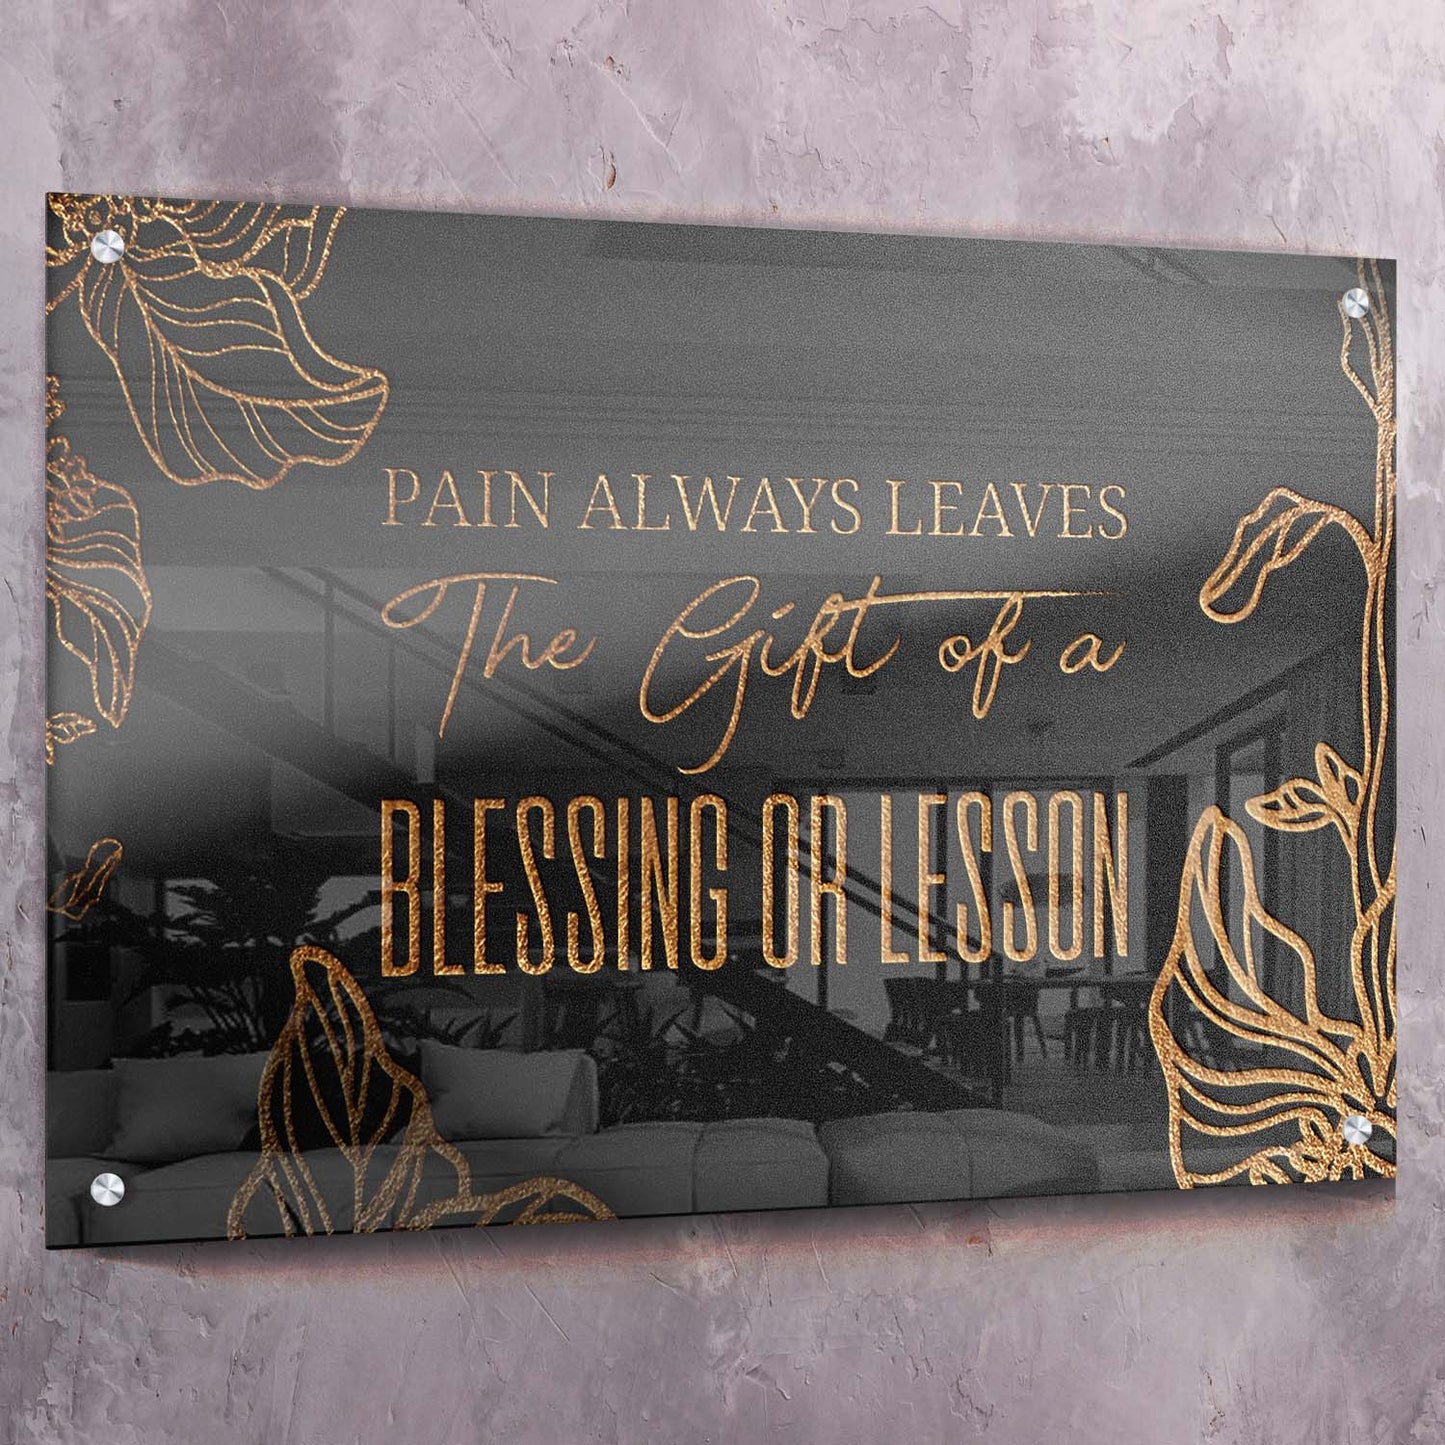 Pain Always Leaves the Gift of a Blessing or Lesson Art Wall Art | Inspirational Wall Art Motivational Wall Art Quotes Office Art | ImpaktMaker Exclusive Canvas Art Landscape